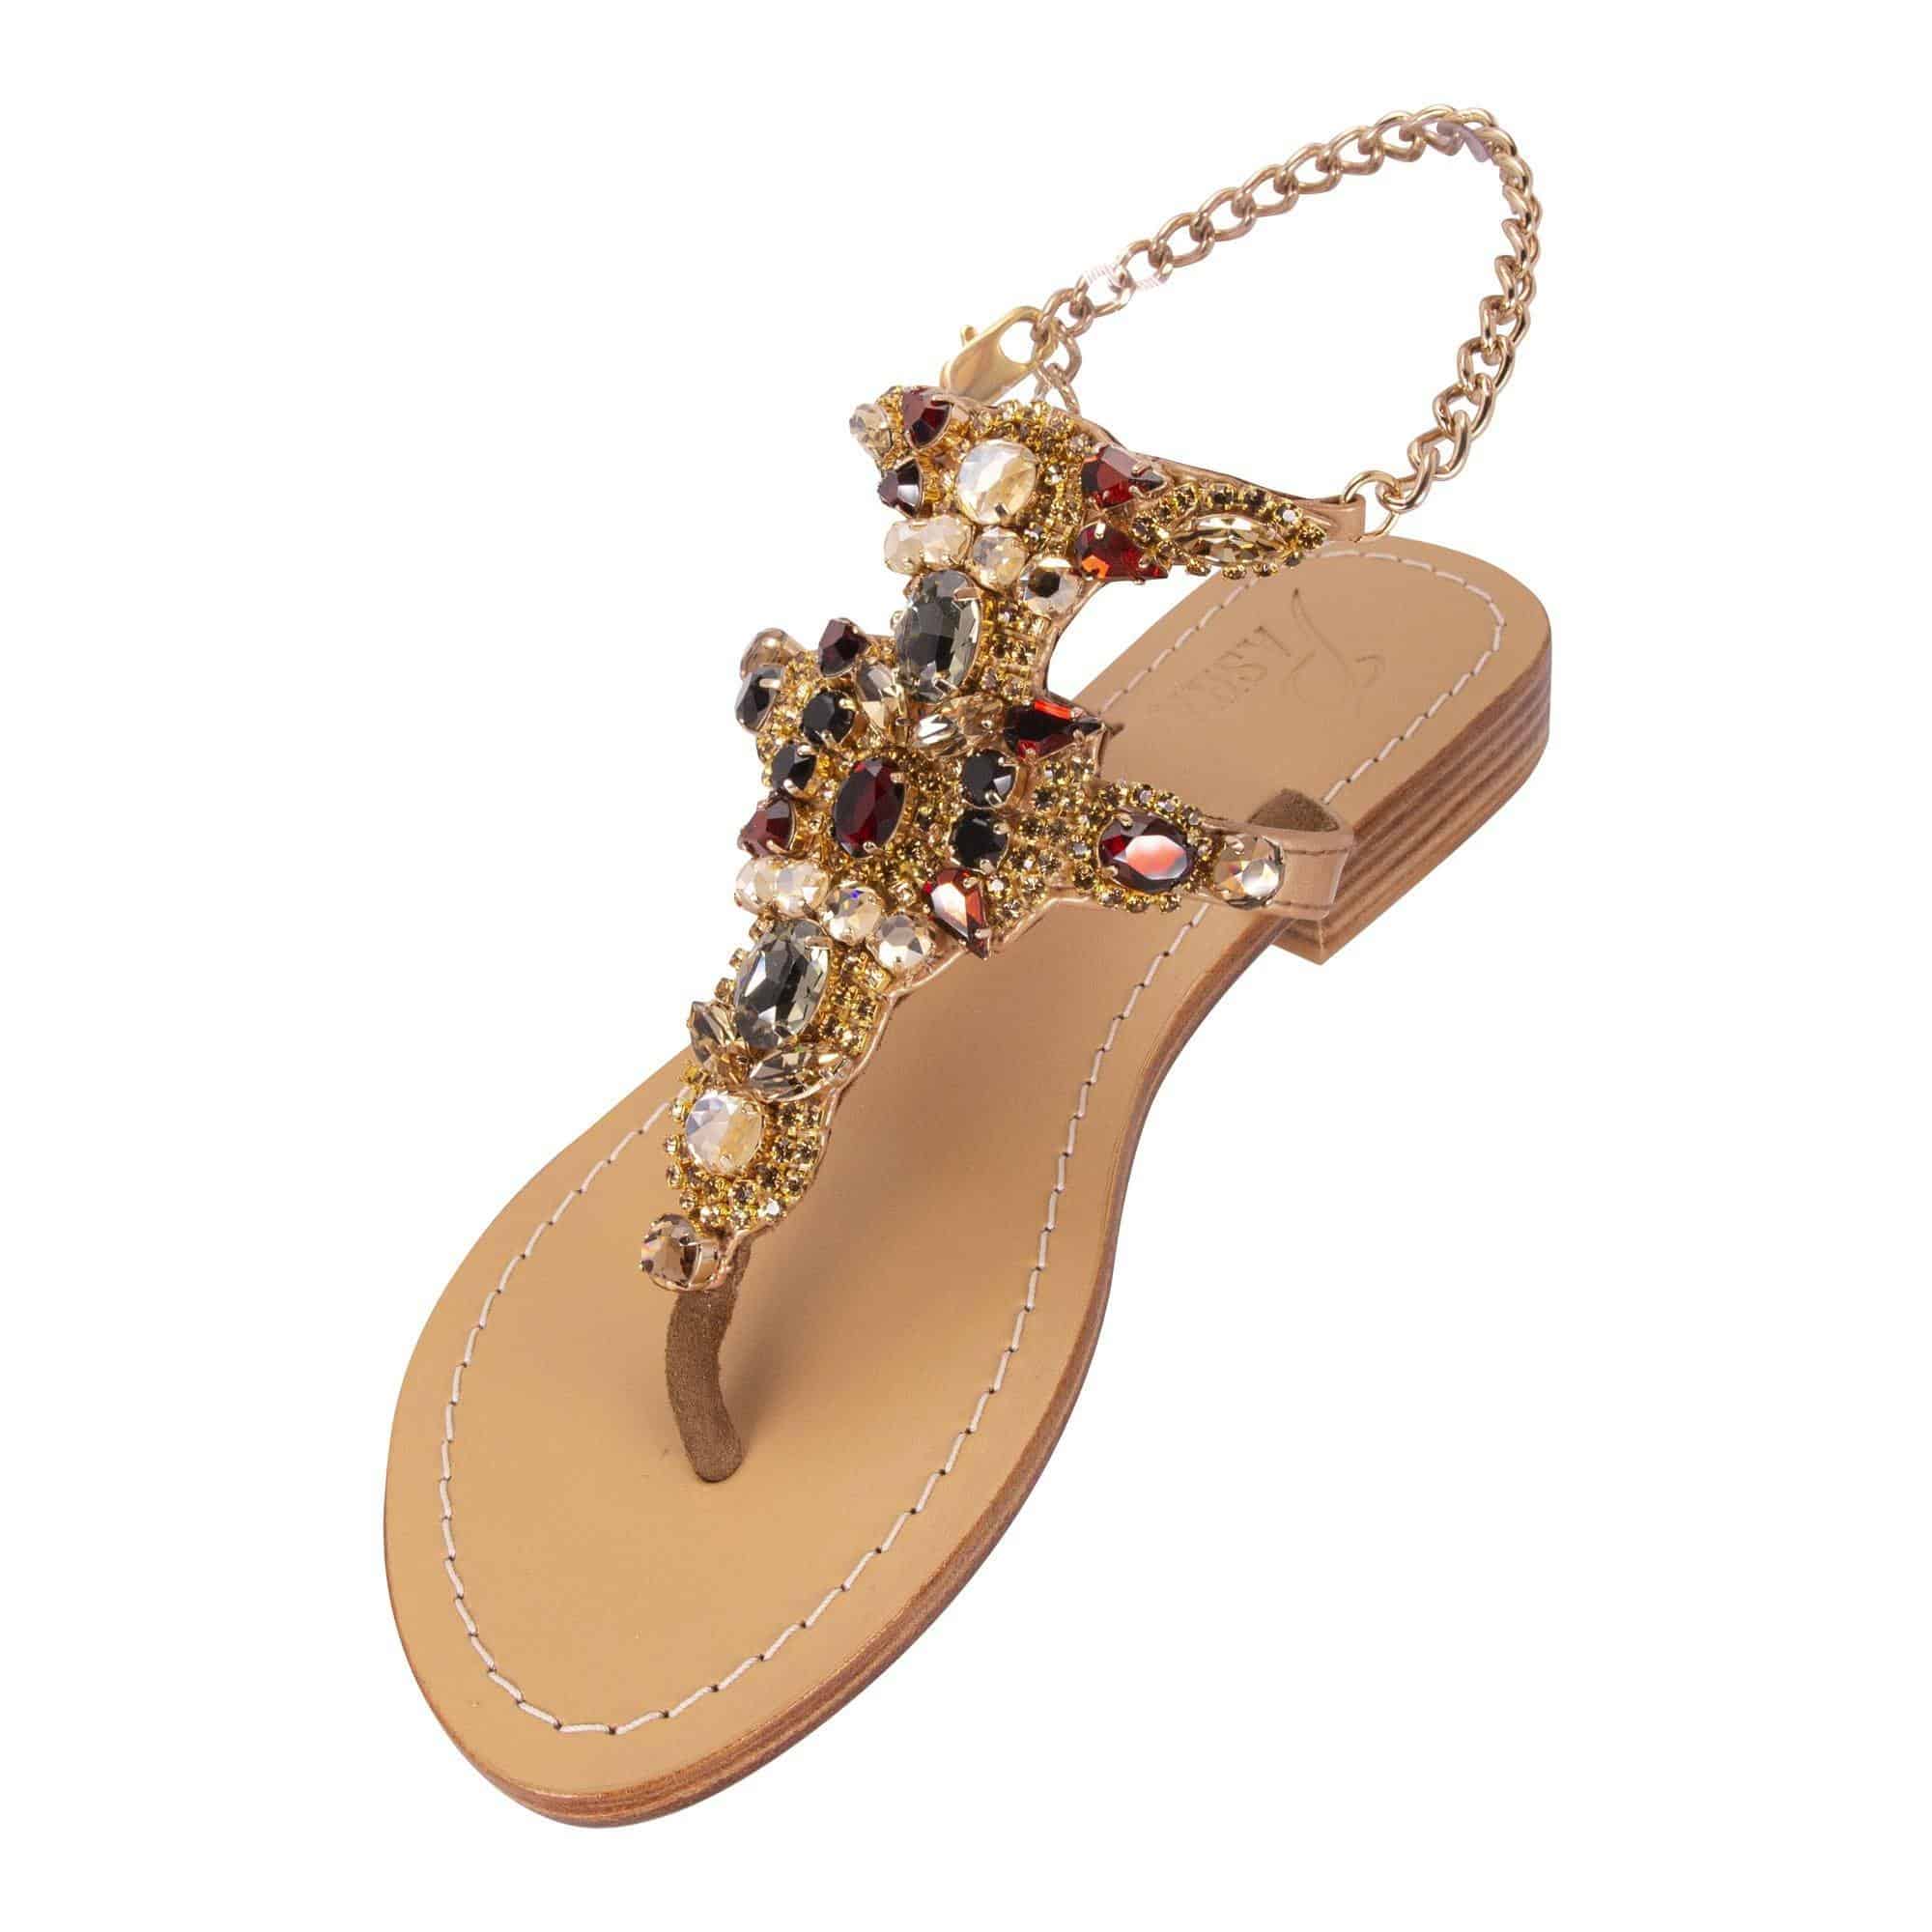 LICHADES - Pasha Sandals - Jewelry for your feet